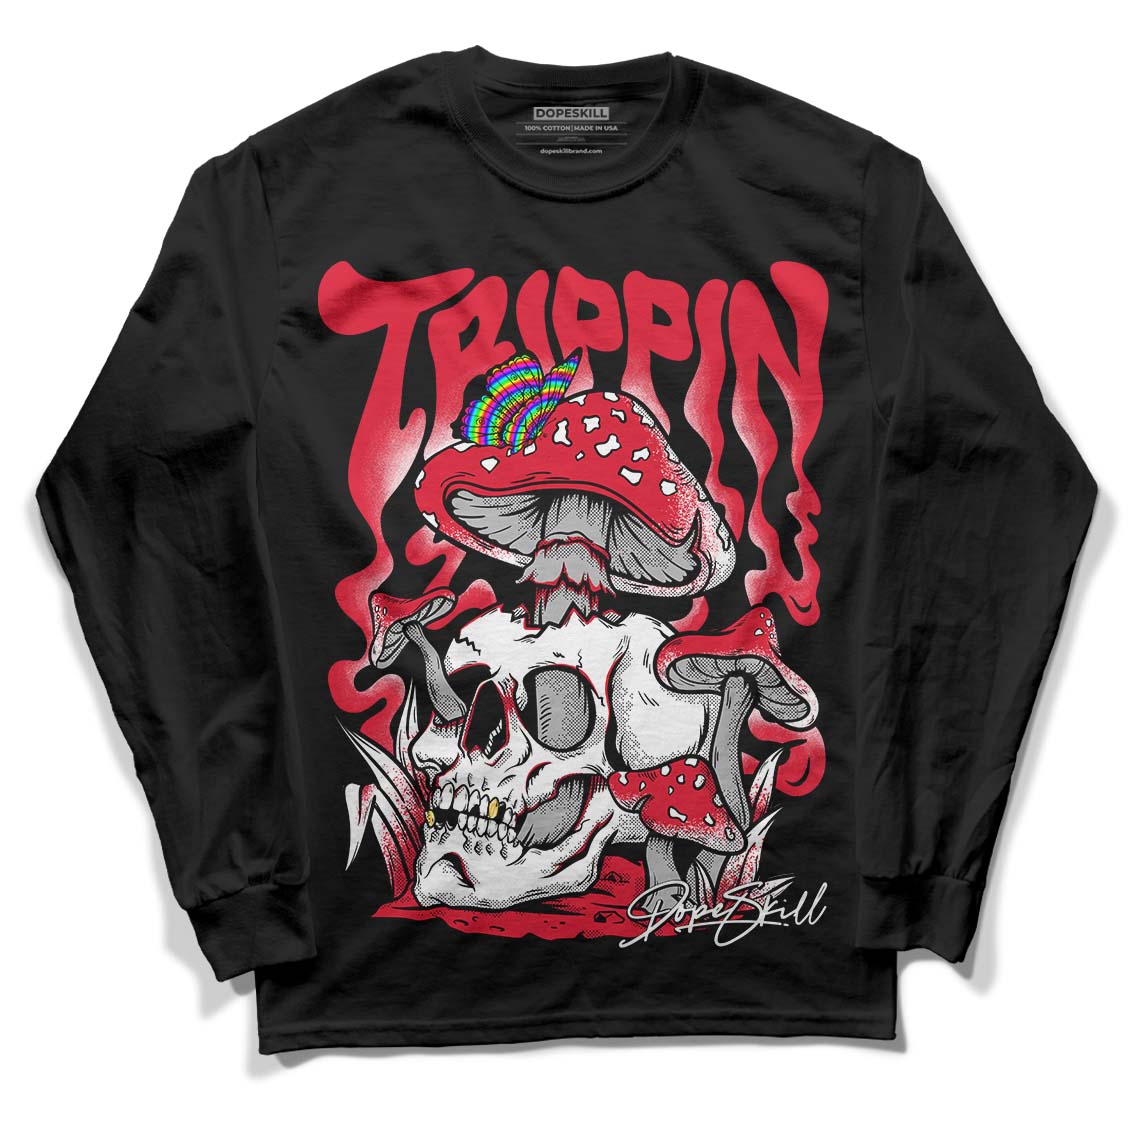 Lost & Found 1s DopeSkill Long Sleeve T-Shirt Trippin Graphic - Black